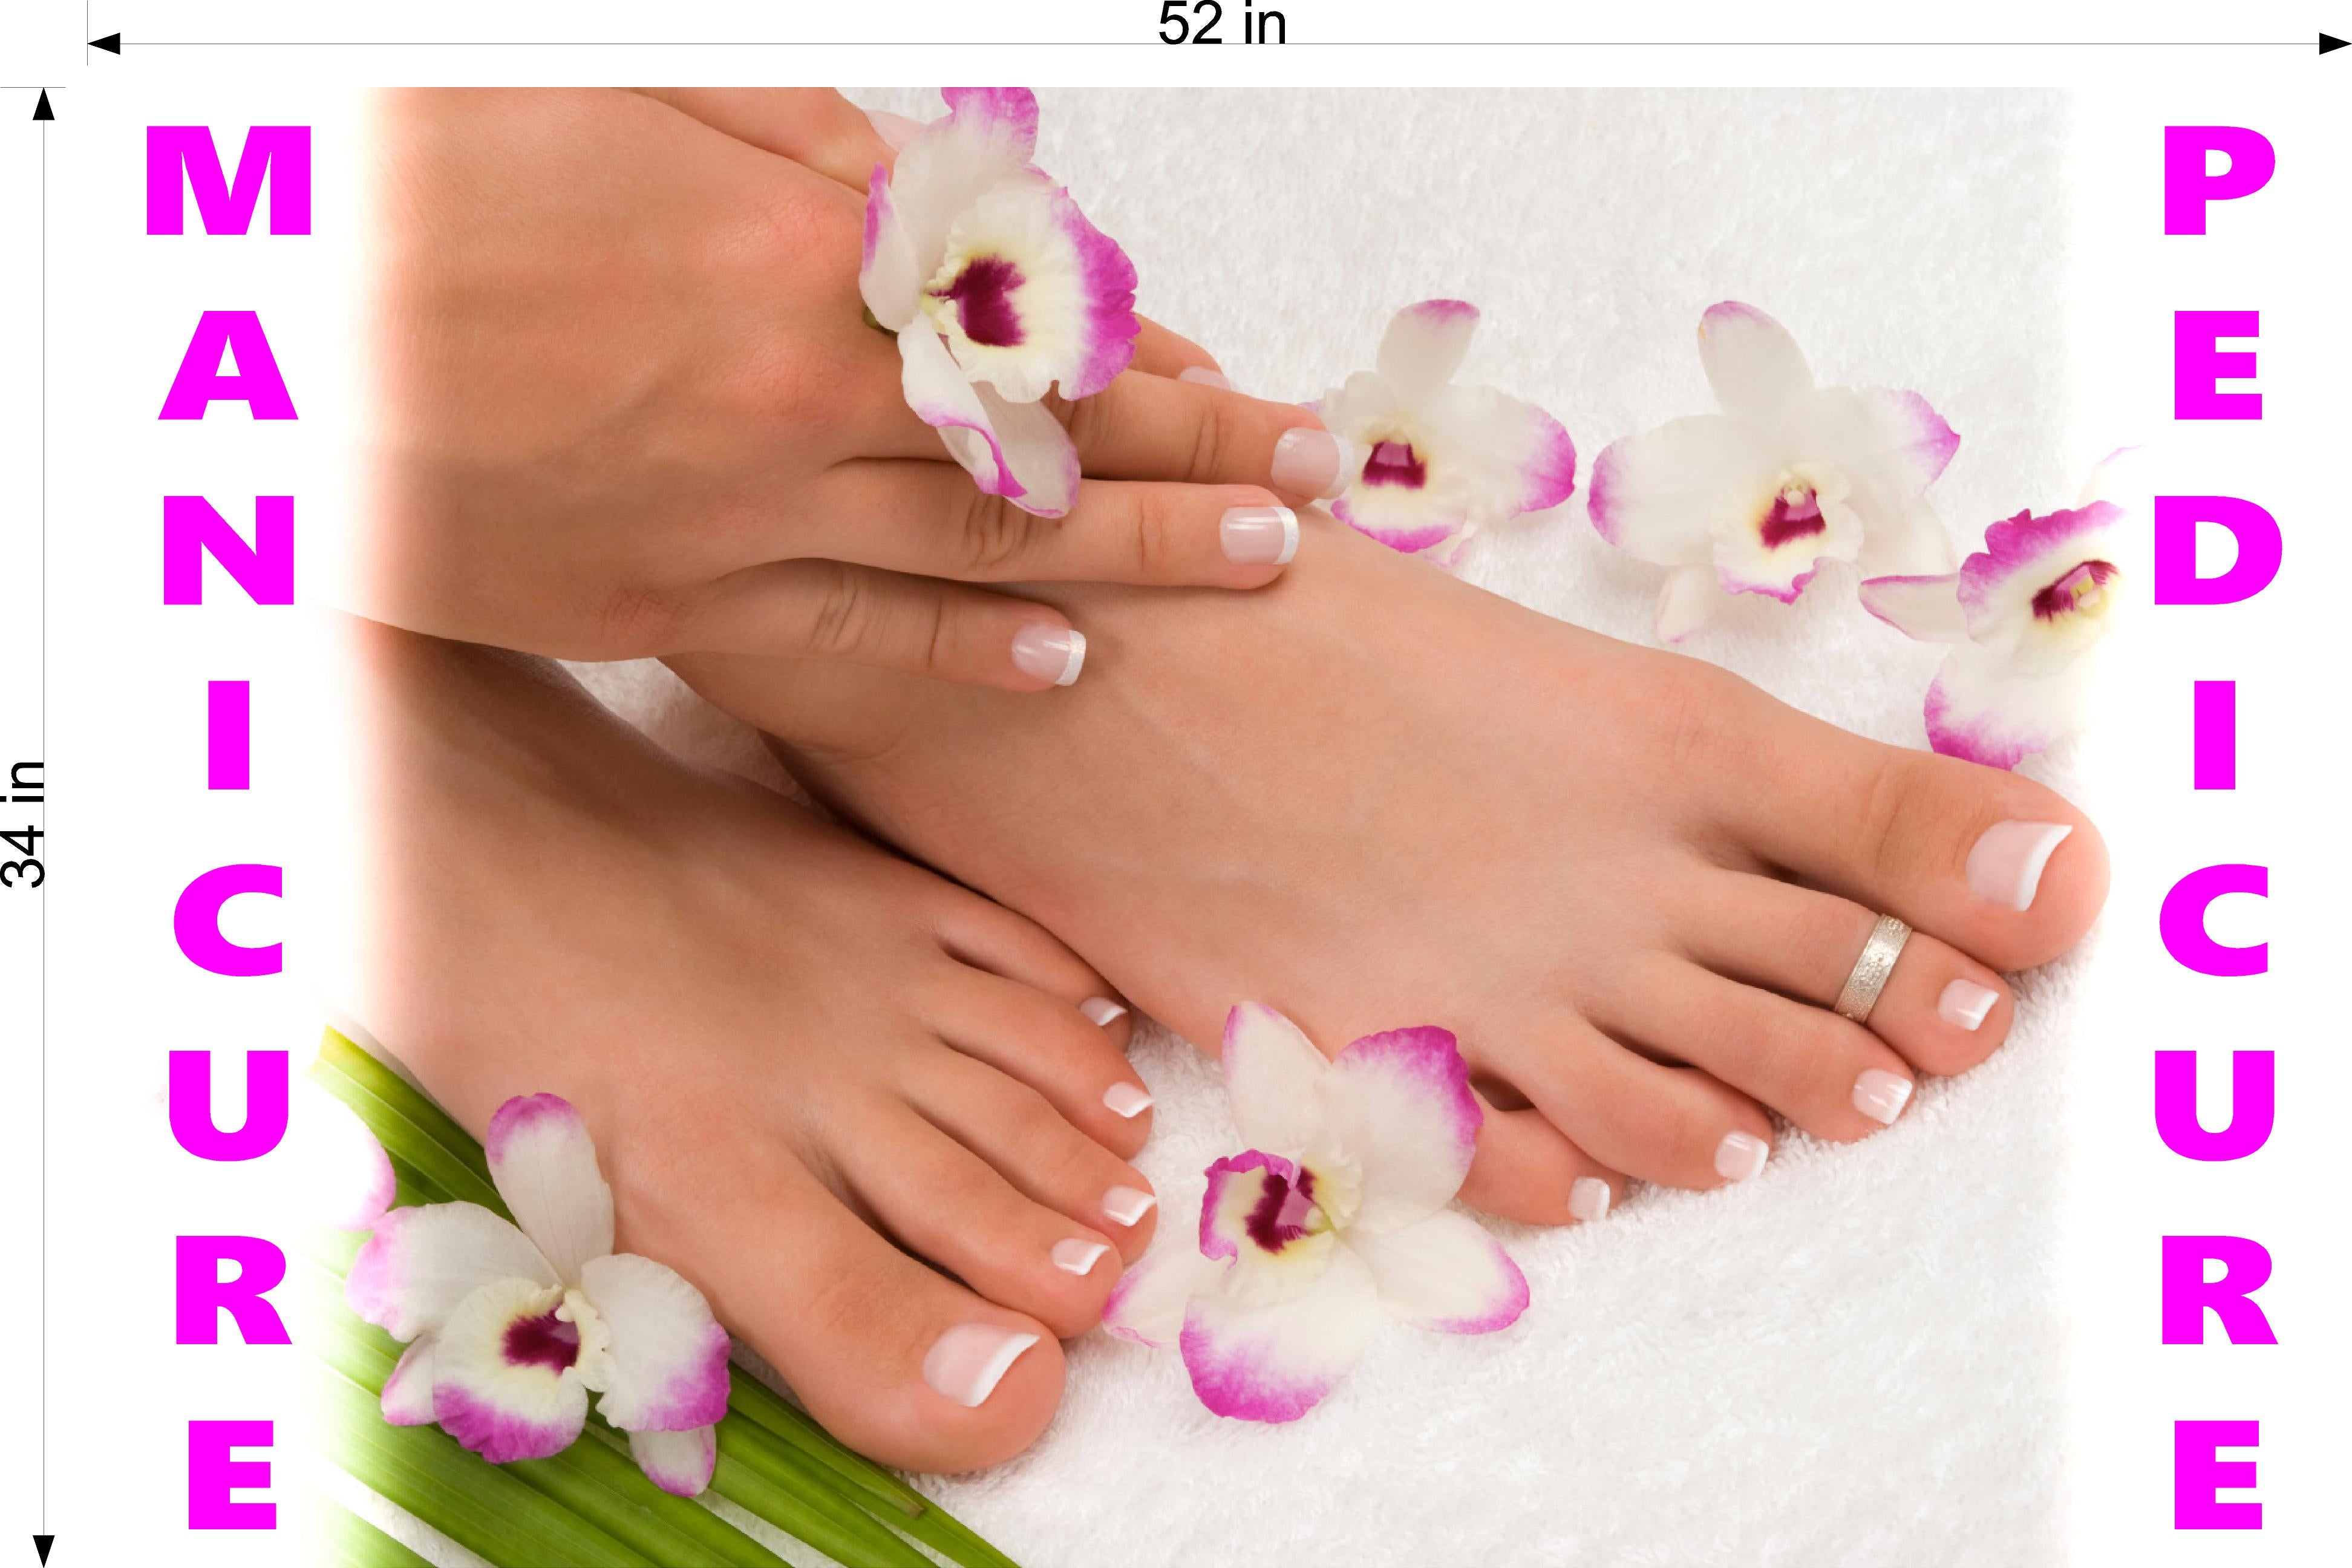 Pedicure & Manicure 05 Wallpaper Poster Decal with Adhesive Backing Wall Sticker Decor Indoors Interior Sign Vertical